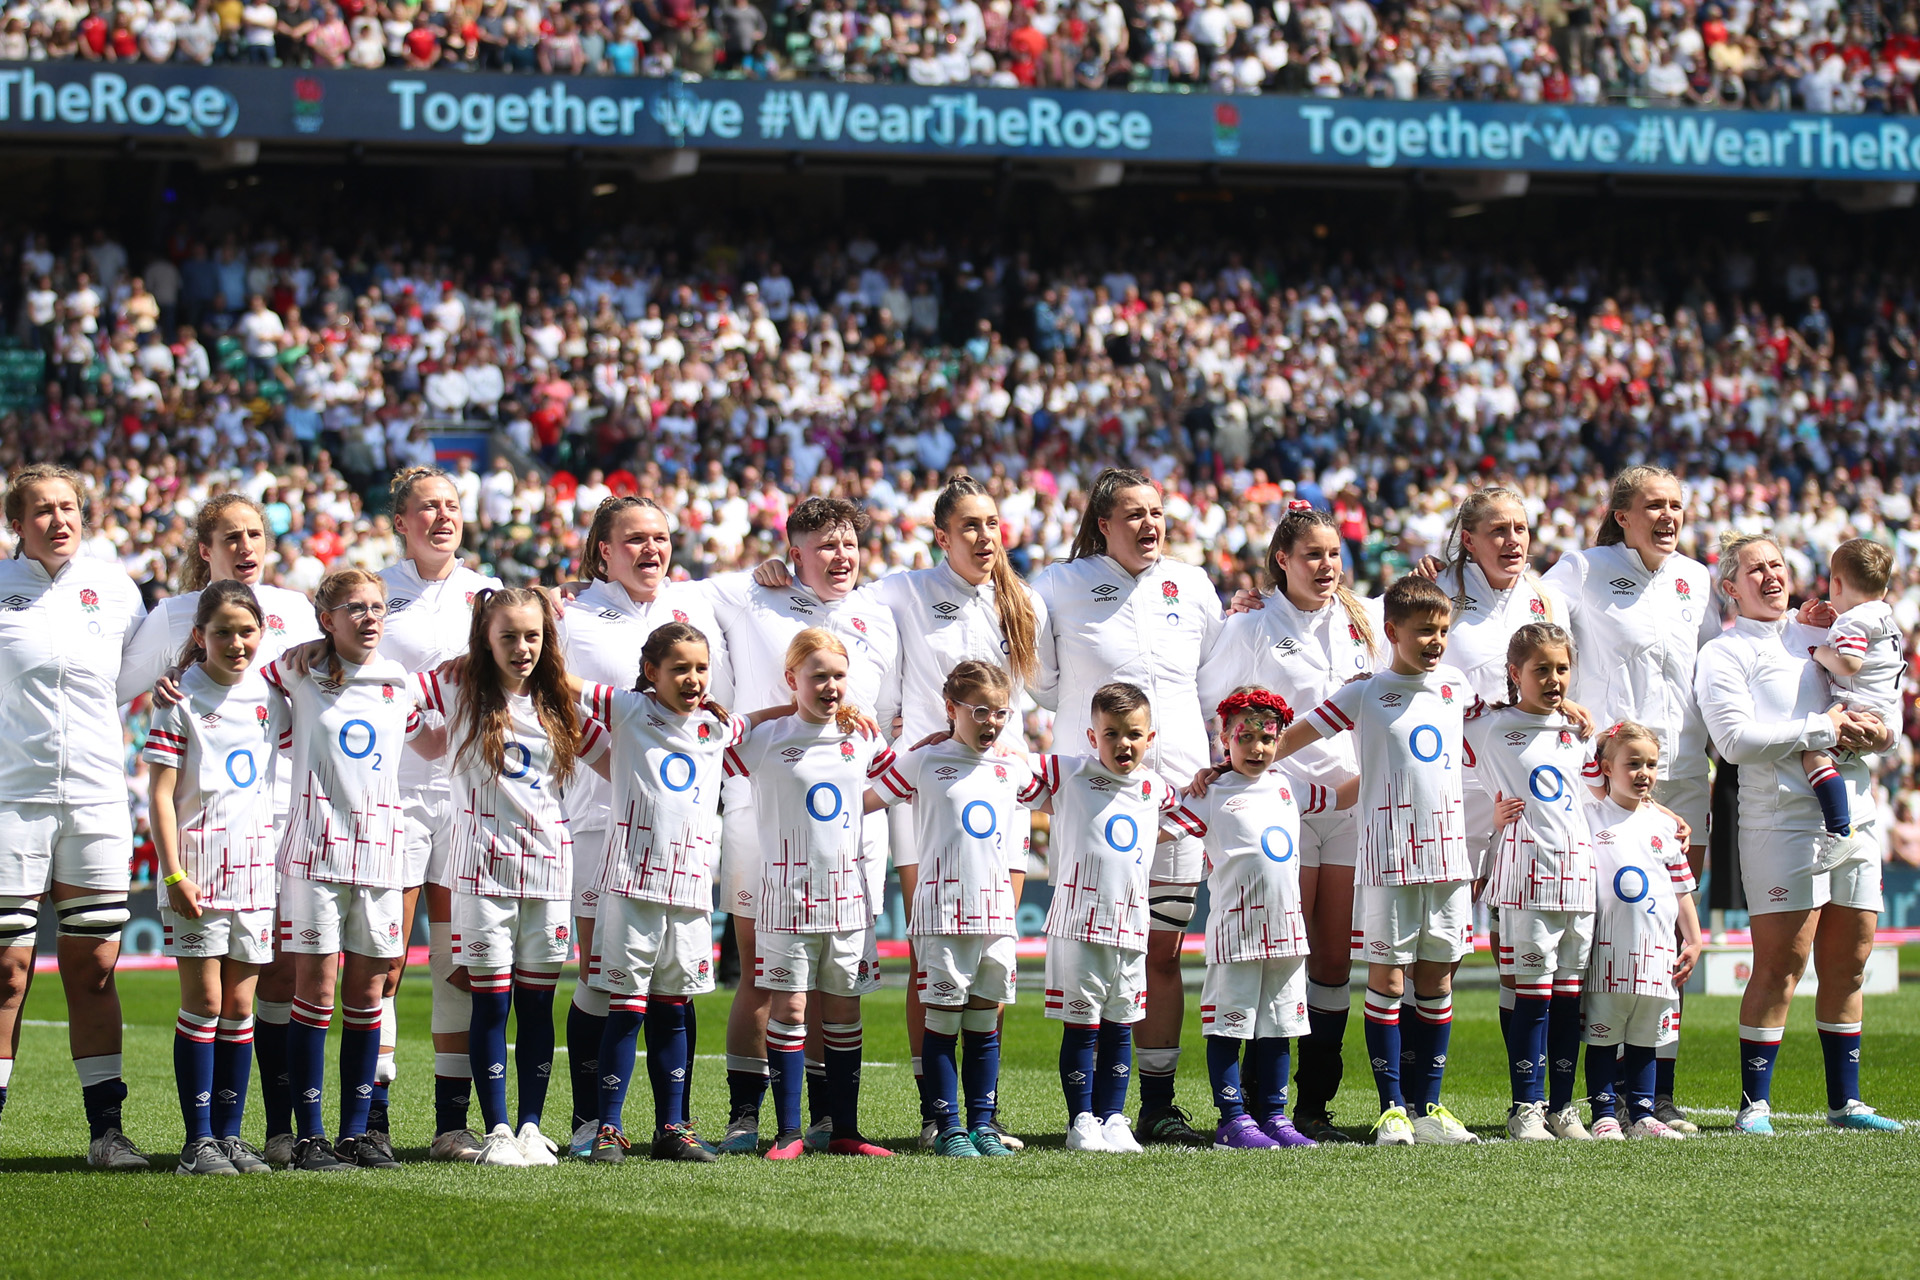 The mascots line up with the team during the TikTok Women's Six Nations match between England and France at Twickenham Stadium on April 29, 2023 in London, England.